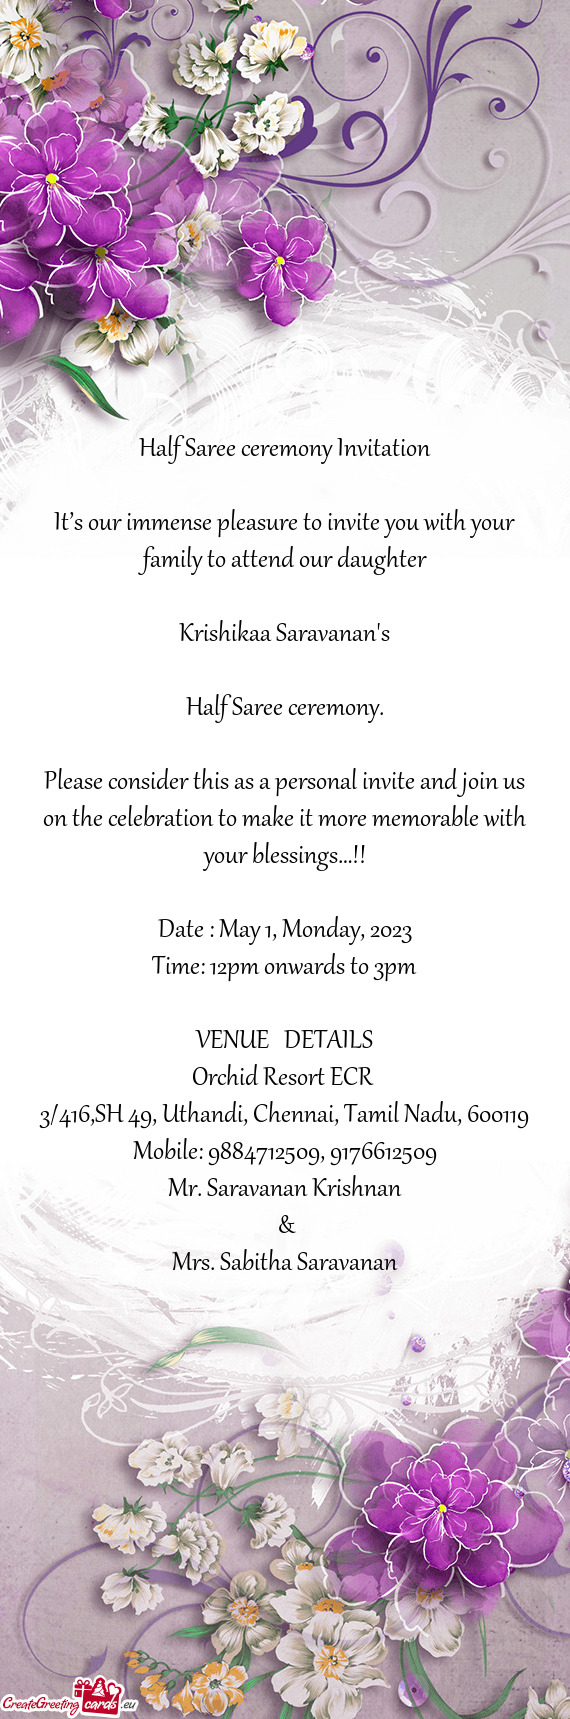 Please consider this as a personal invite and join us on the celebration to make it more memorable w